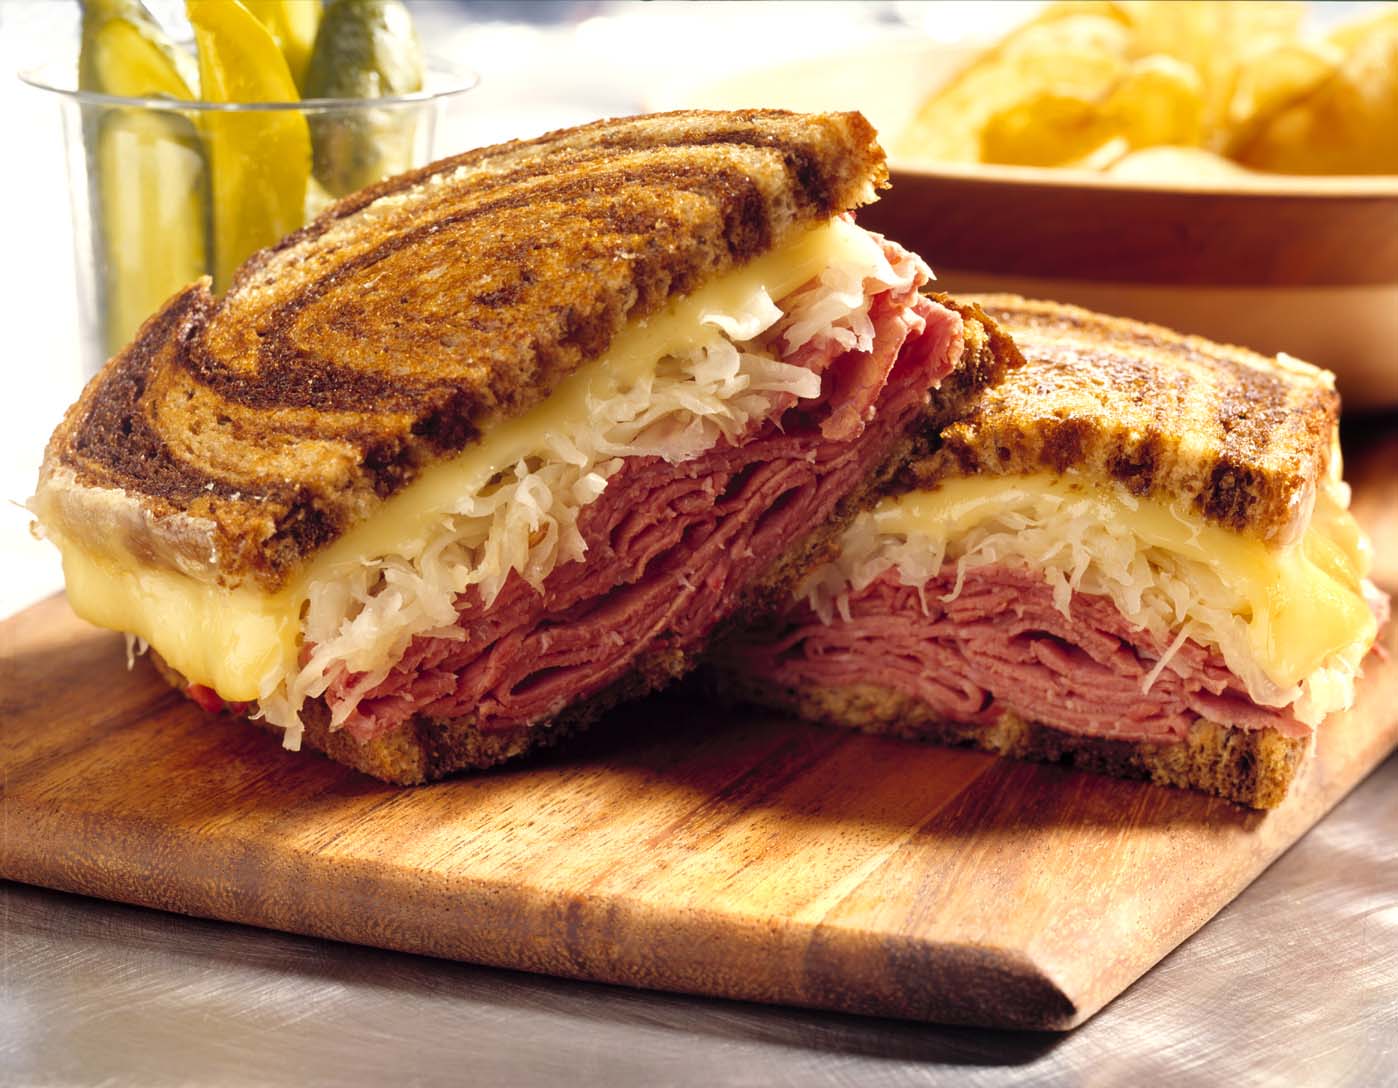 Can You Name These American Dishes? 13 Reuben sandwich